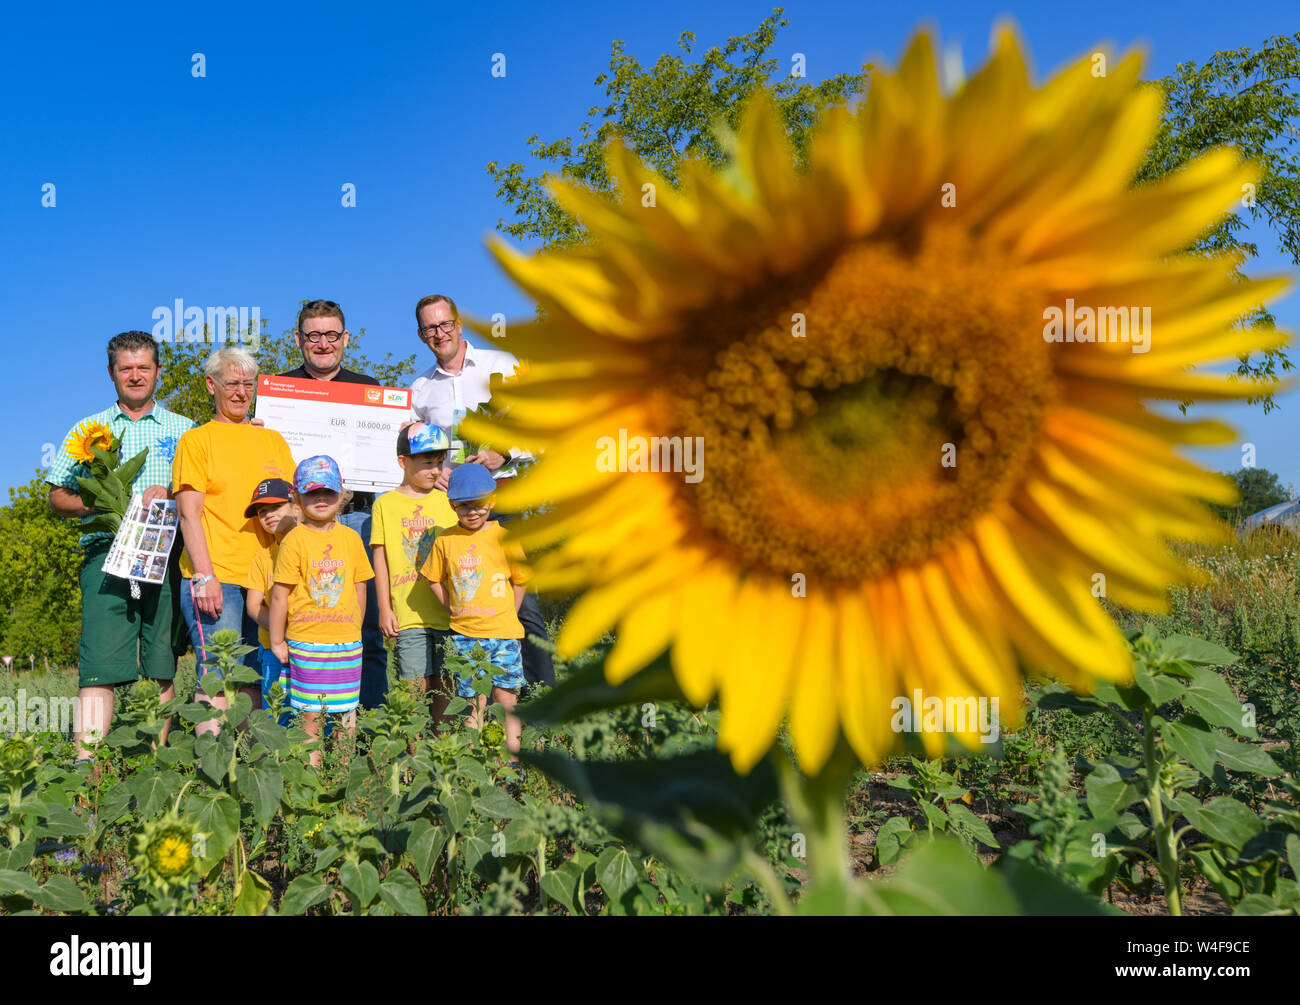 23 July 2019, Brandenburg, Vetschau: During a press meeting (l-r) Thomas Goebel, farmer, Sieglinde Weidner, head of hospital, Gregor Beyer, managing director of Forum Natur Brandenburg e.V. and Michael Klöckner, department director of the East German Savings Banks Association, and four kita children stand on a flowering area in the Spreewald. The East German Savings Banks Association is the main supporter of the 'Brandenburg blossoms out' project to promote biodiversity in Brandenburg's cultural landscape. For the project, farmers make part of their land available voluntarily and free of charg Stock Photo